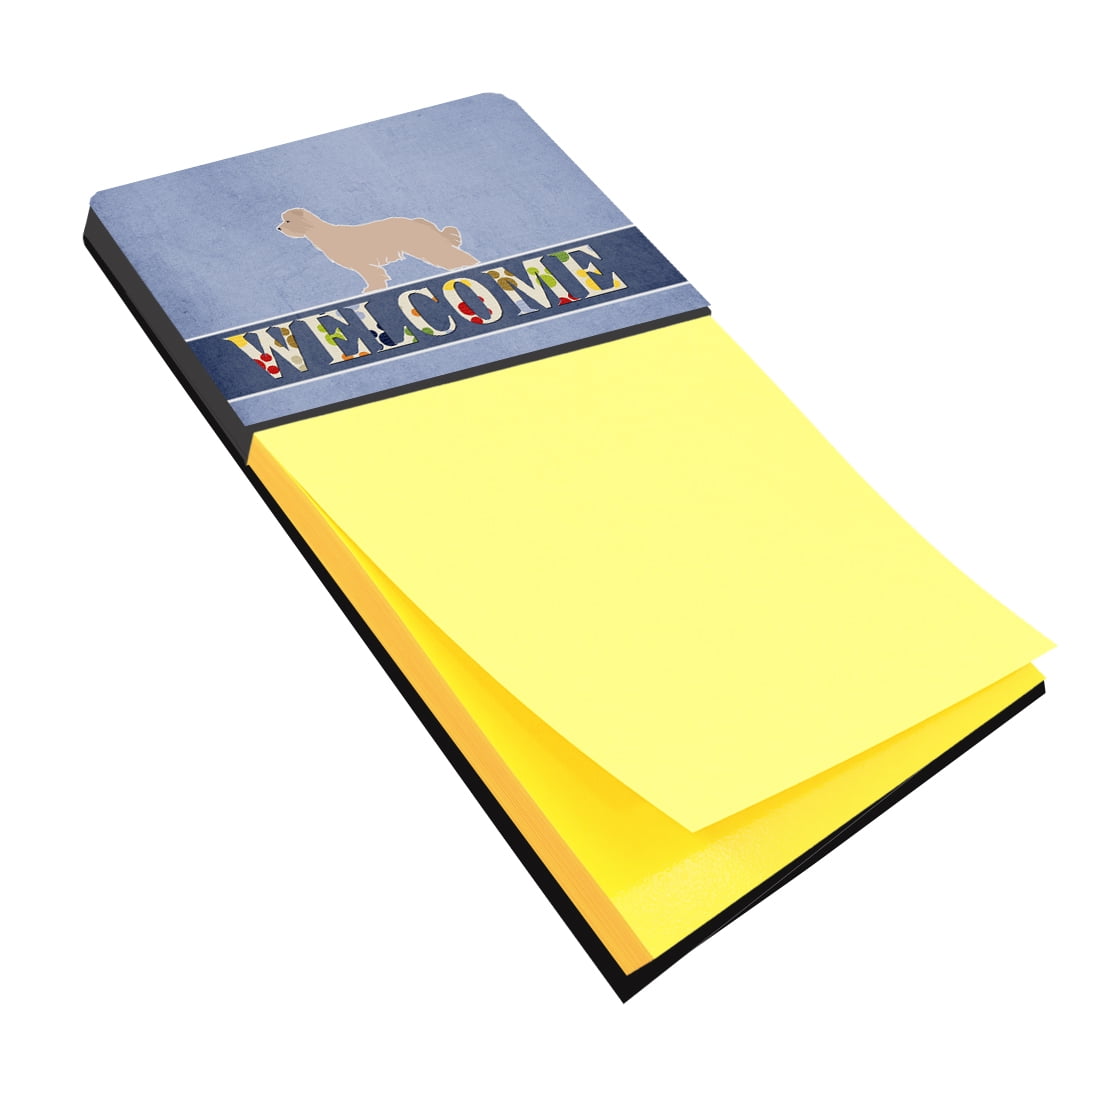 Bb5522sn Pyrenean Shepherd Welcome Sticky Note Holder